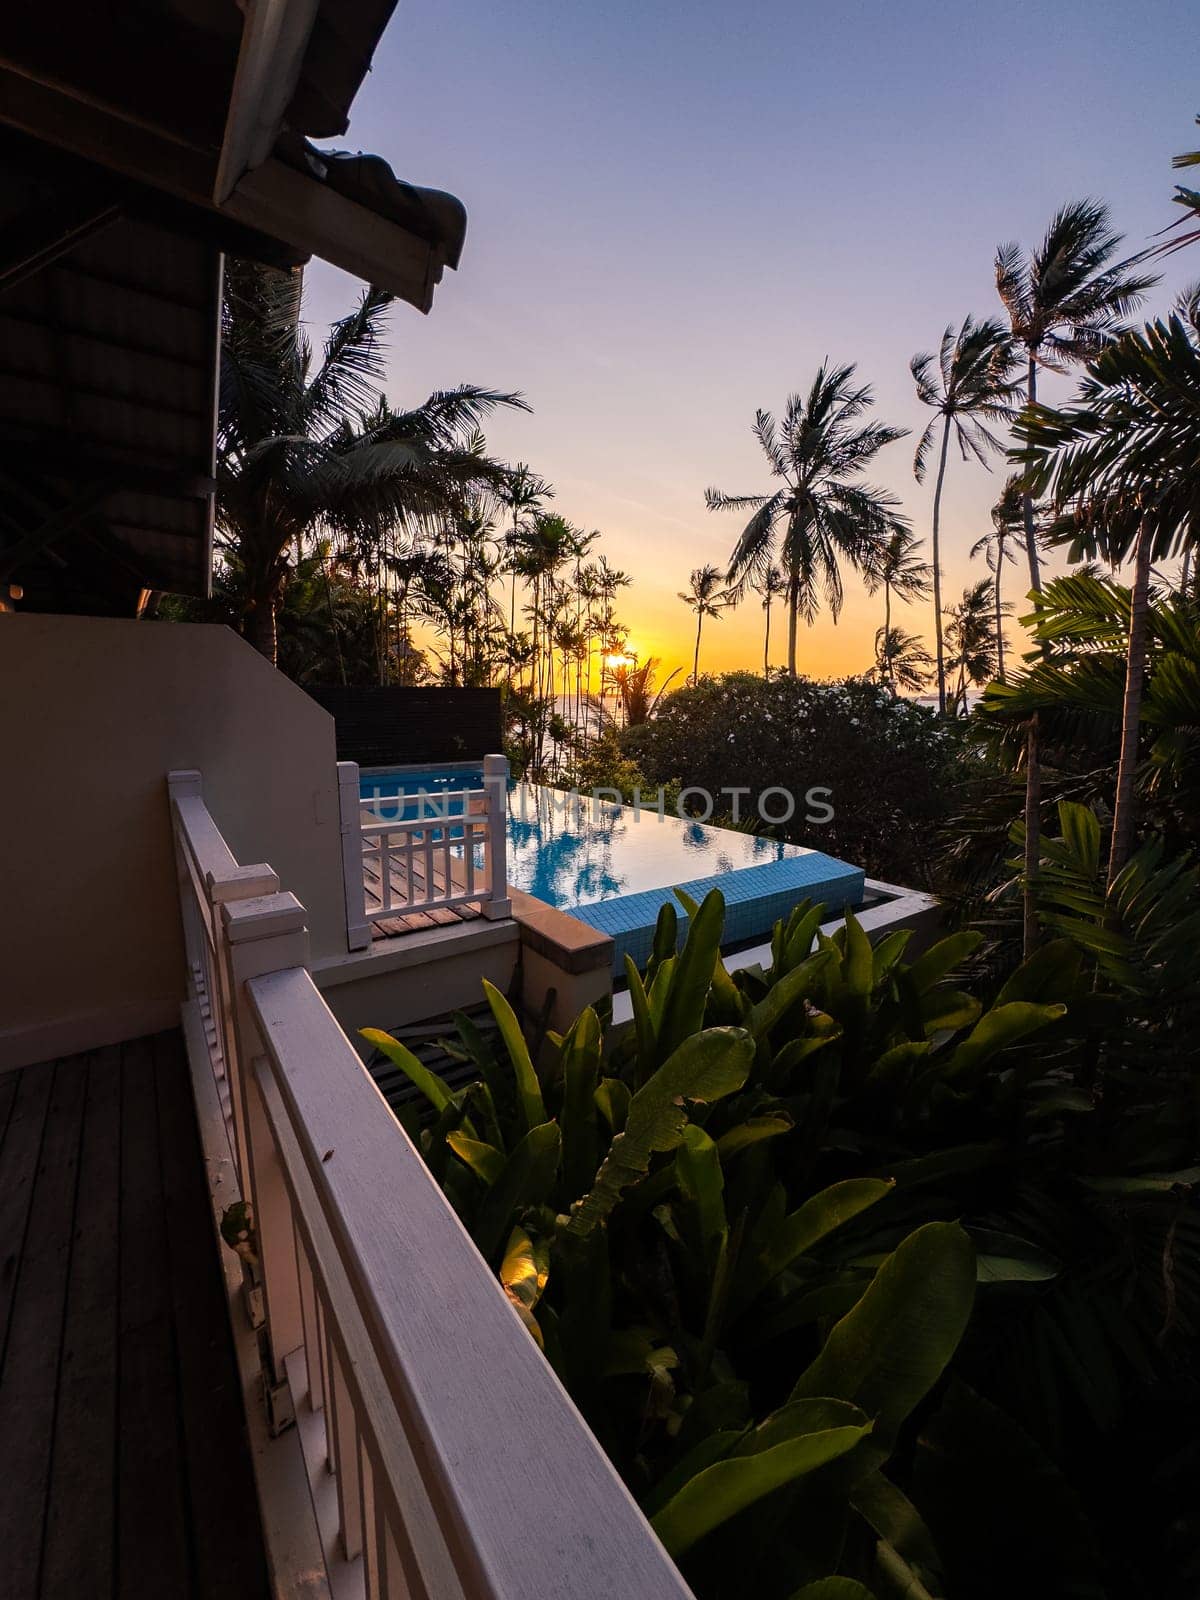 View of a pool resort in Panwa beach in Phuket, Thailand by worldpitou